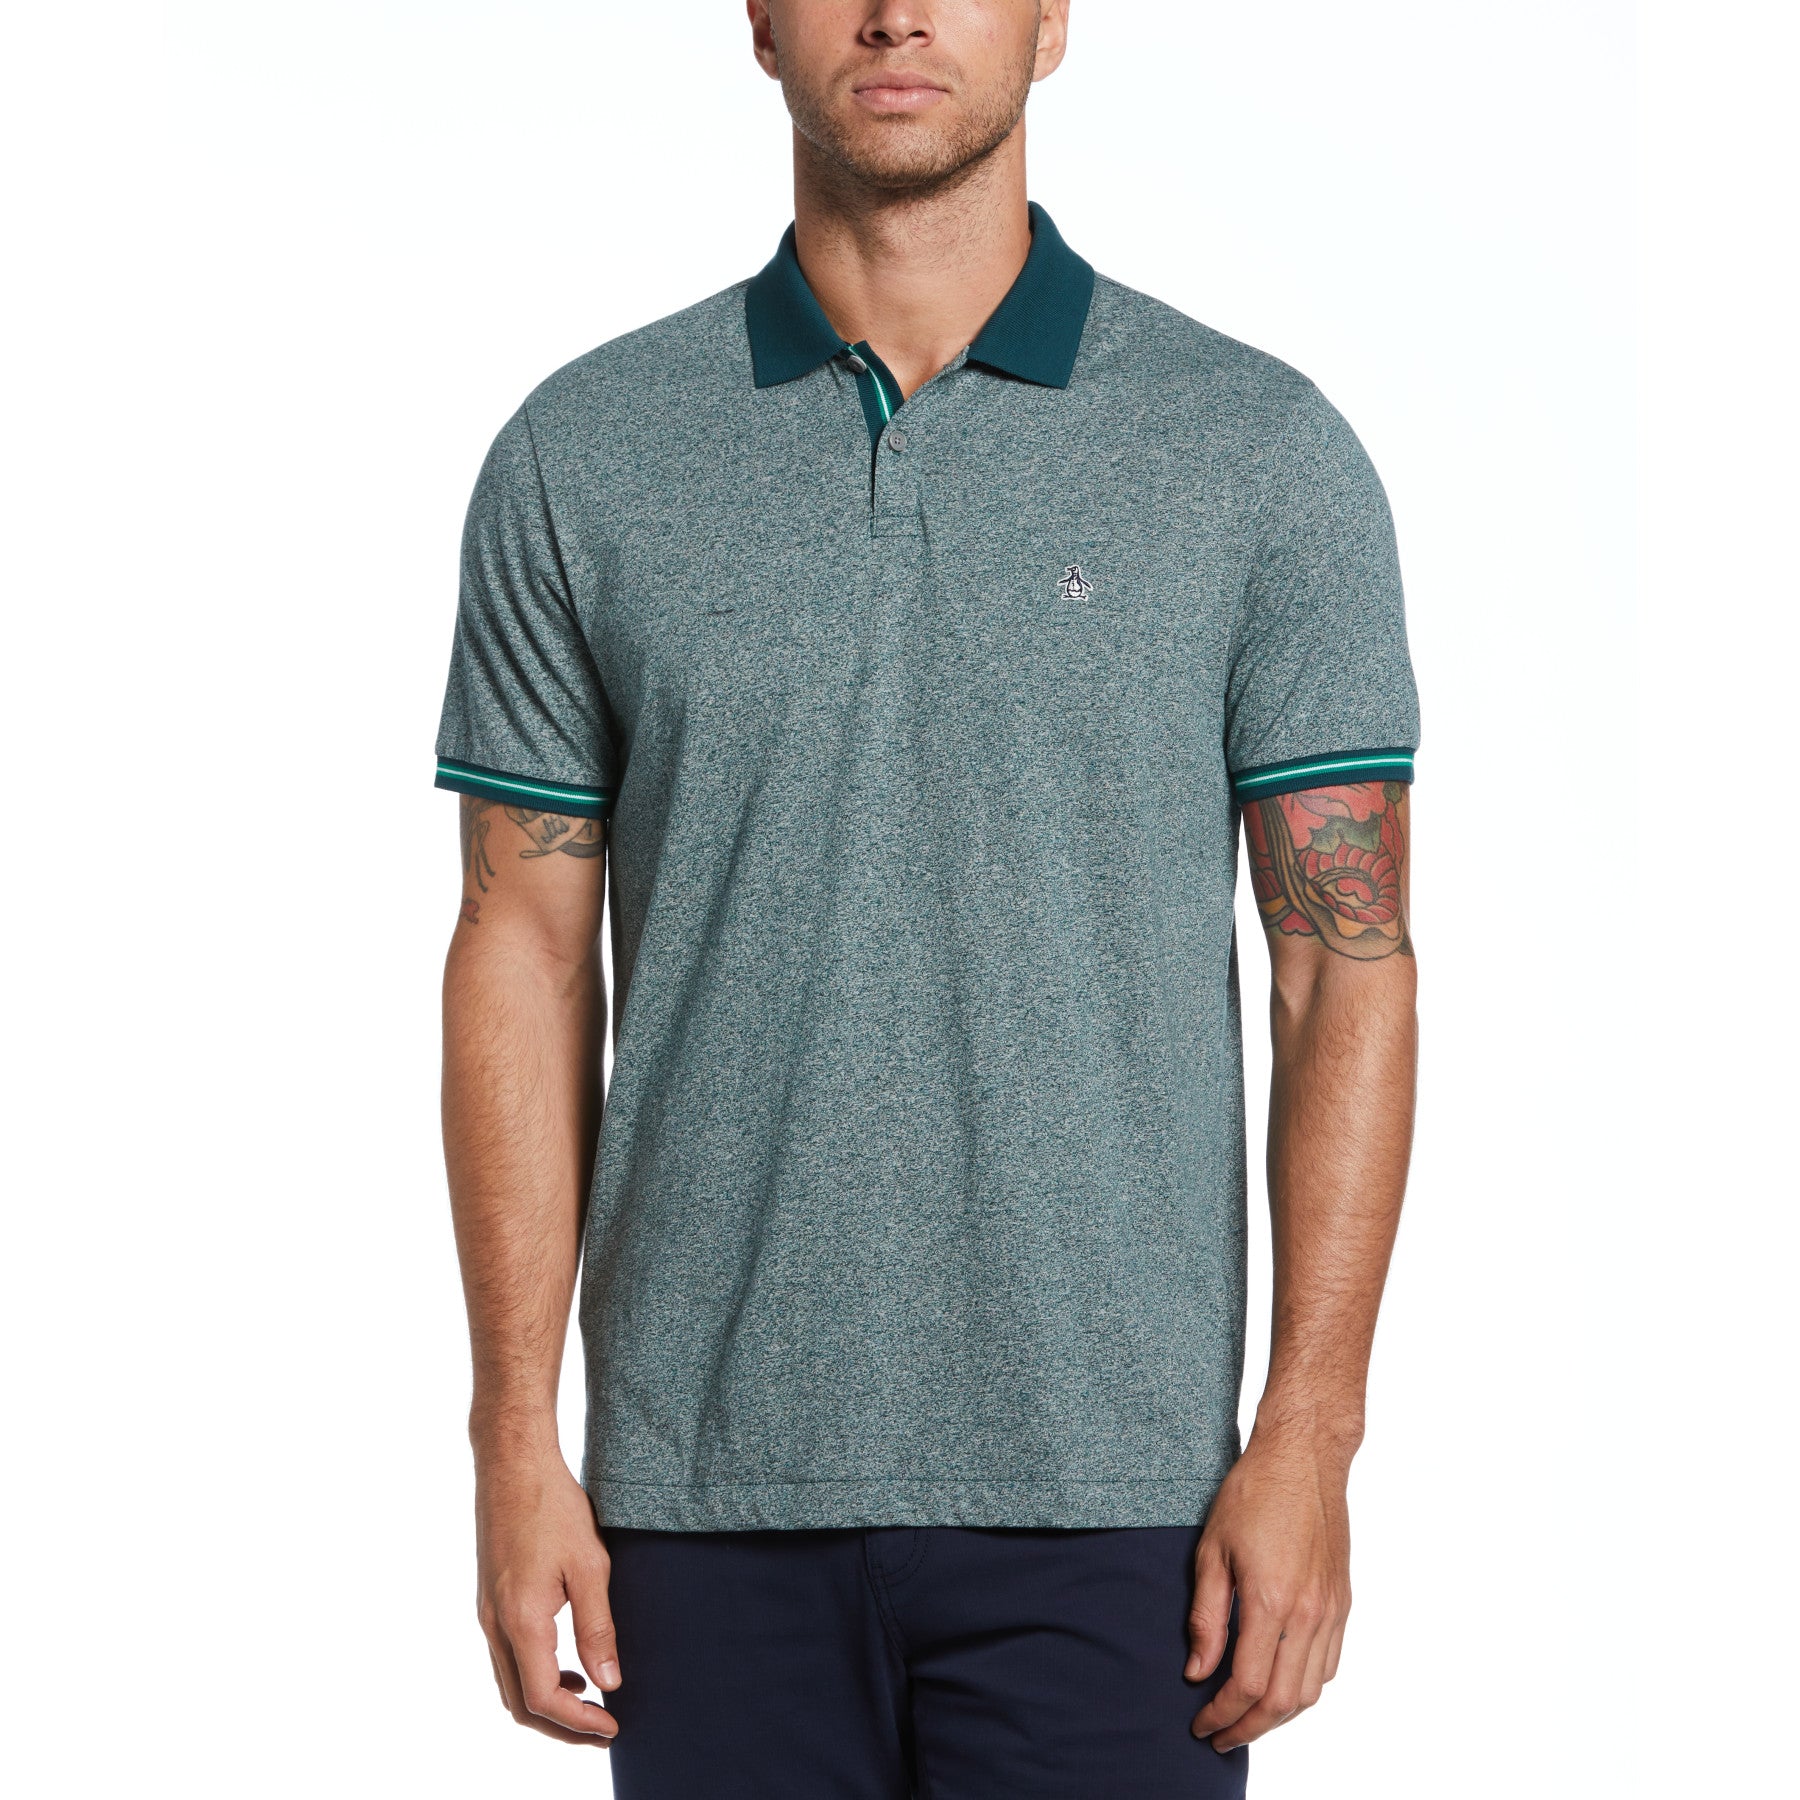 View Tipped Pocket Polo In Ponderosa Pine information